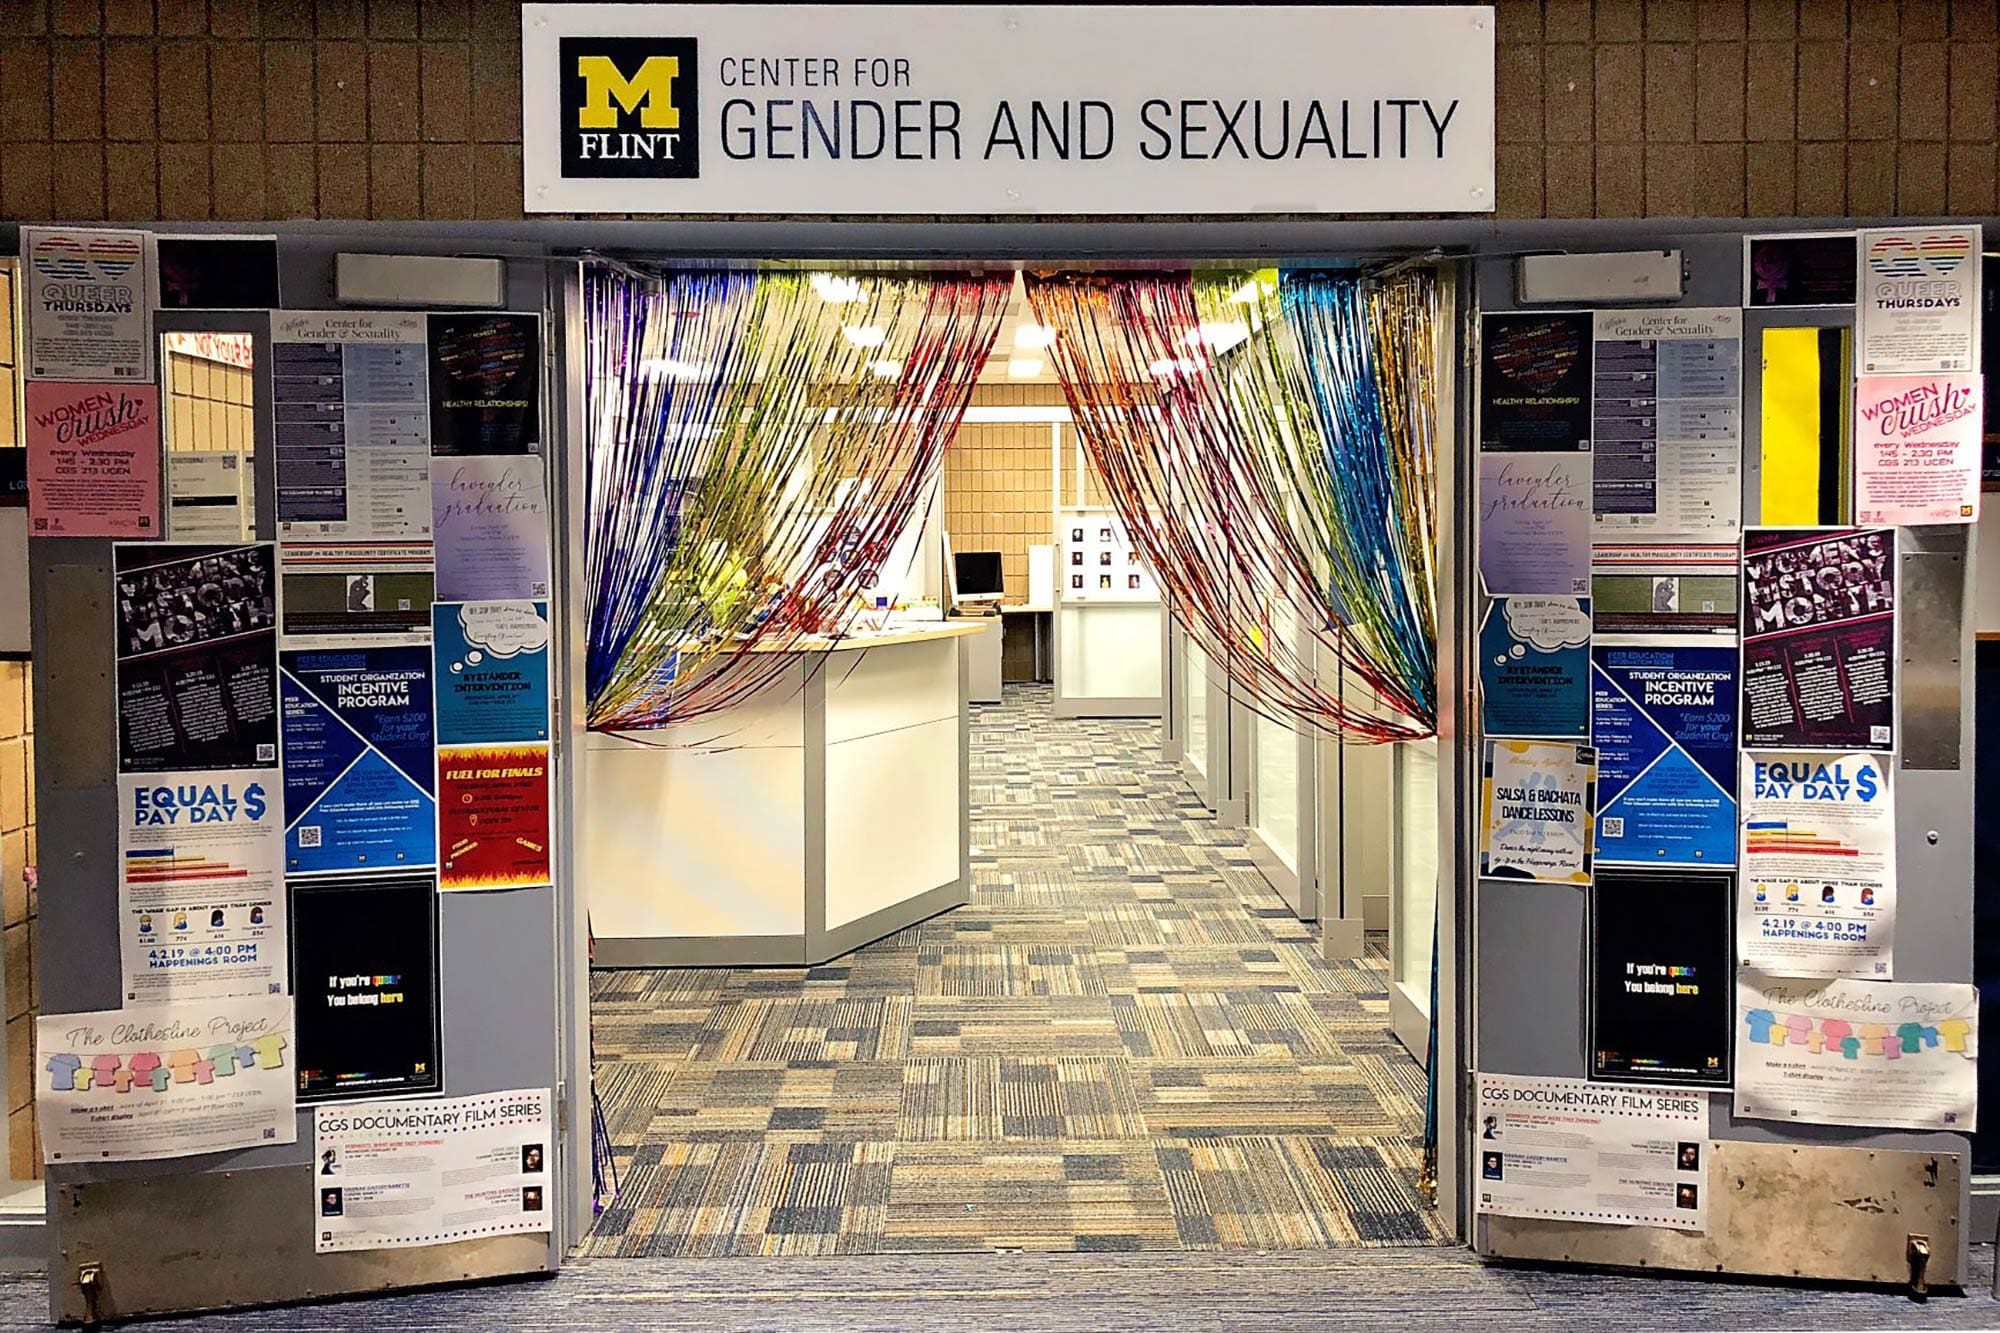 The entrance to UM-Flint's Center for Gender and Sexuality, with two doors open and covered with a variety of posters and announcements, rainbow streamers hanging in the doorframe, and a view into the center itself.